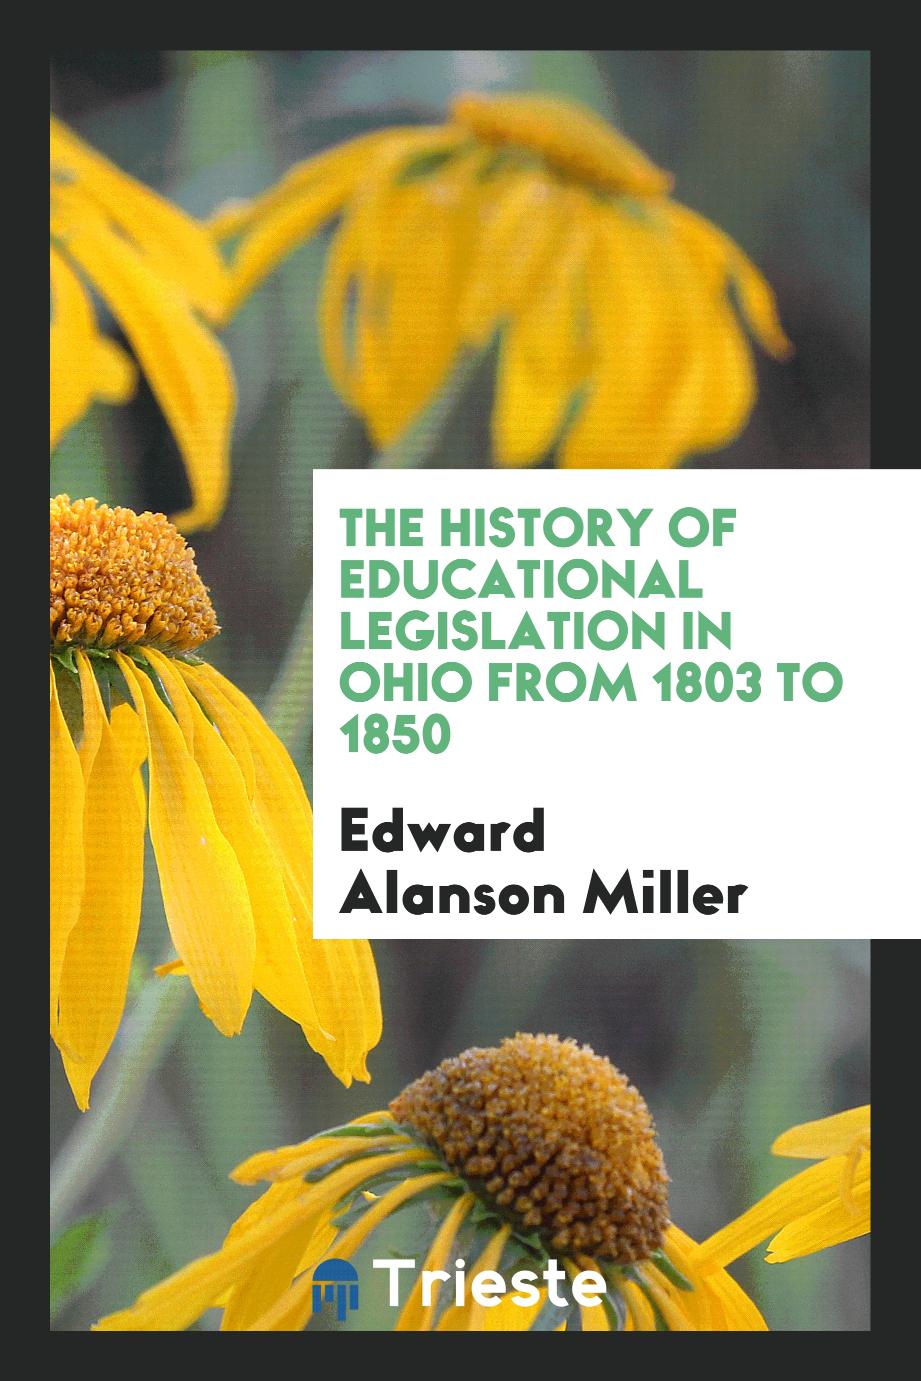 The history of educational legislation in Ohio from 1803 to 1850